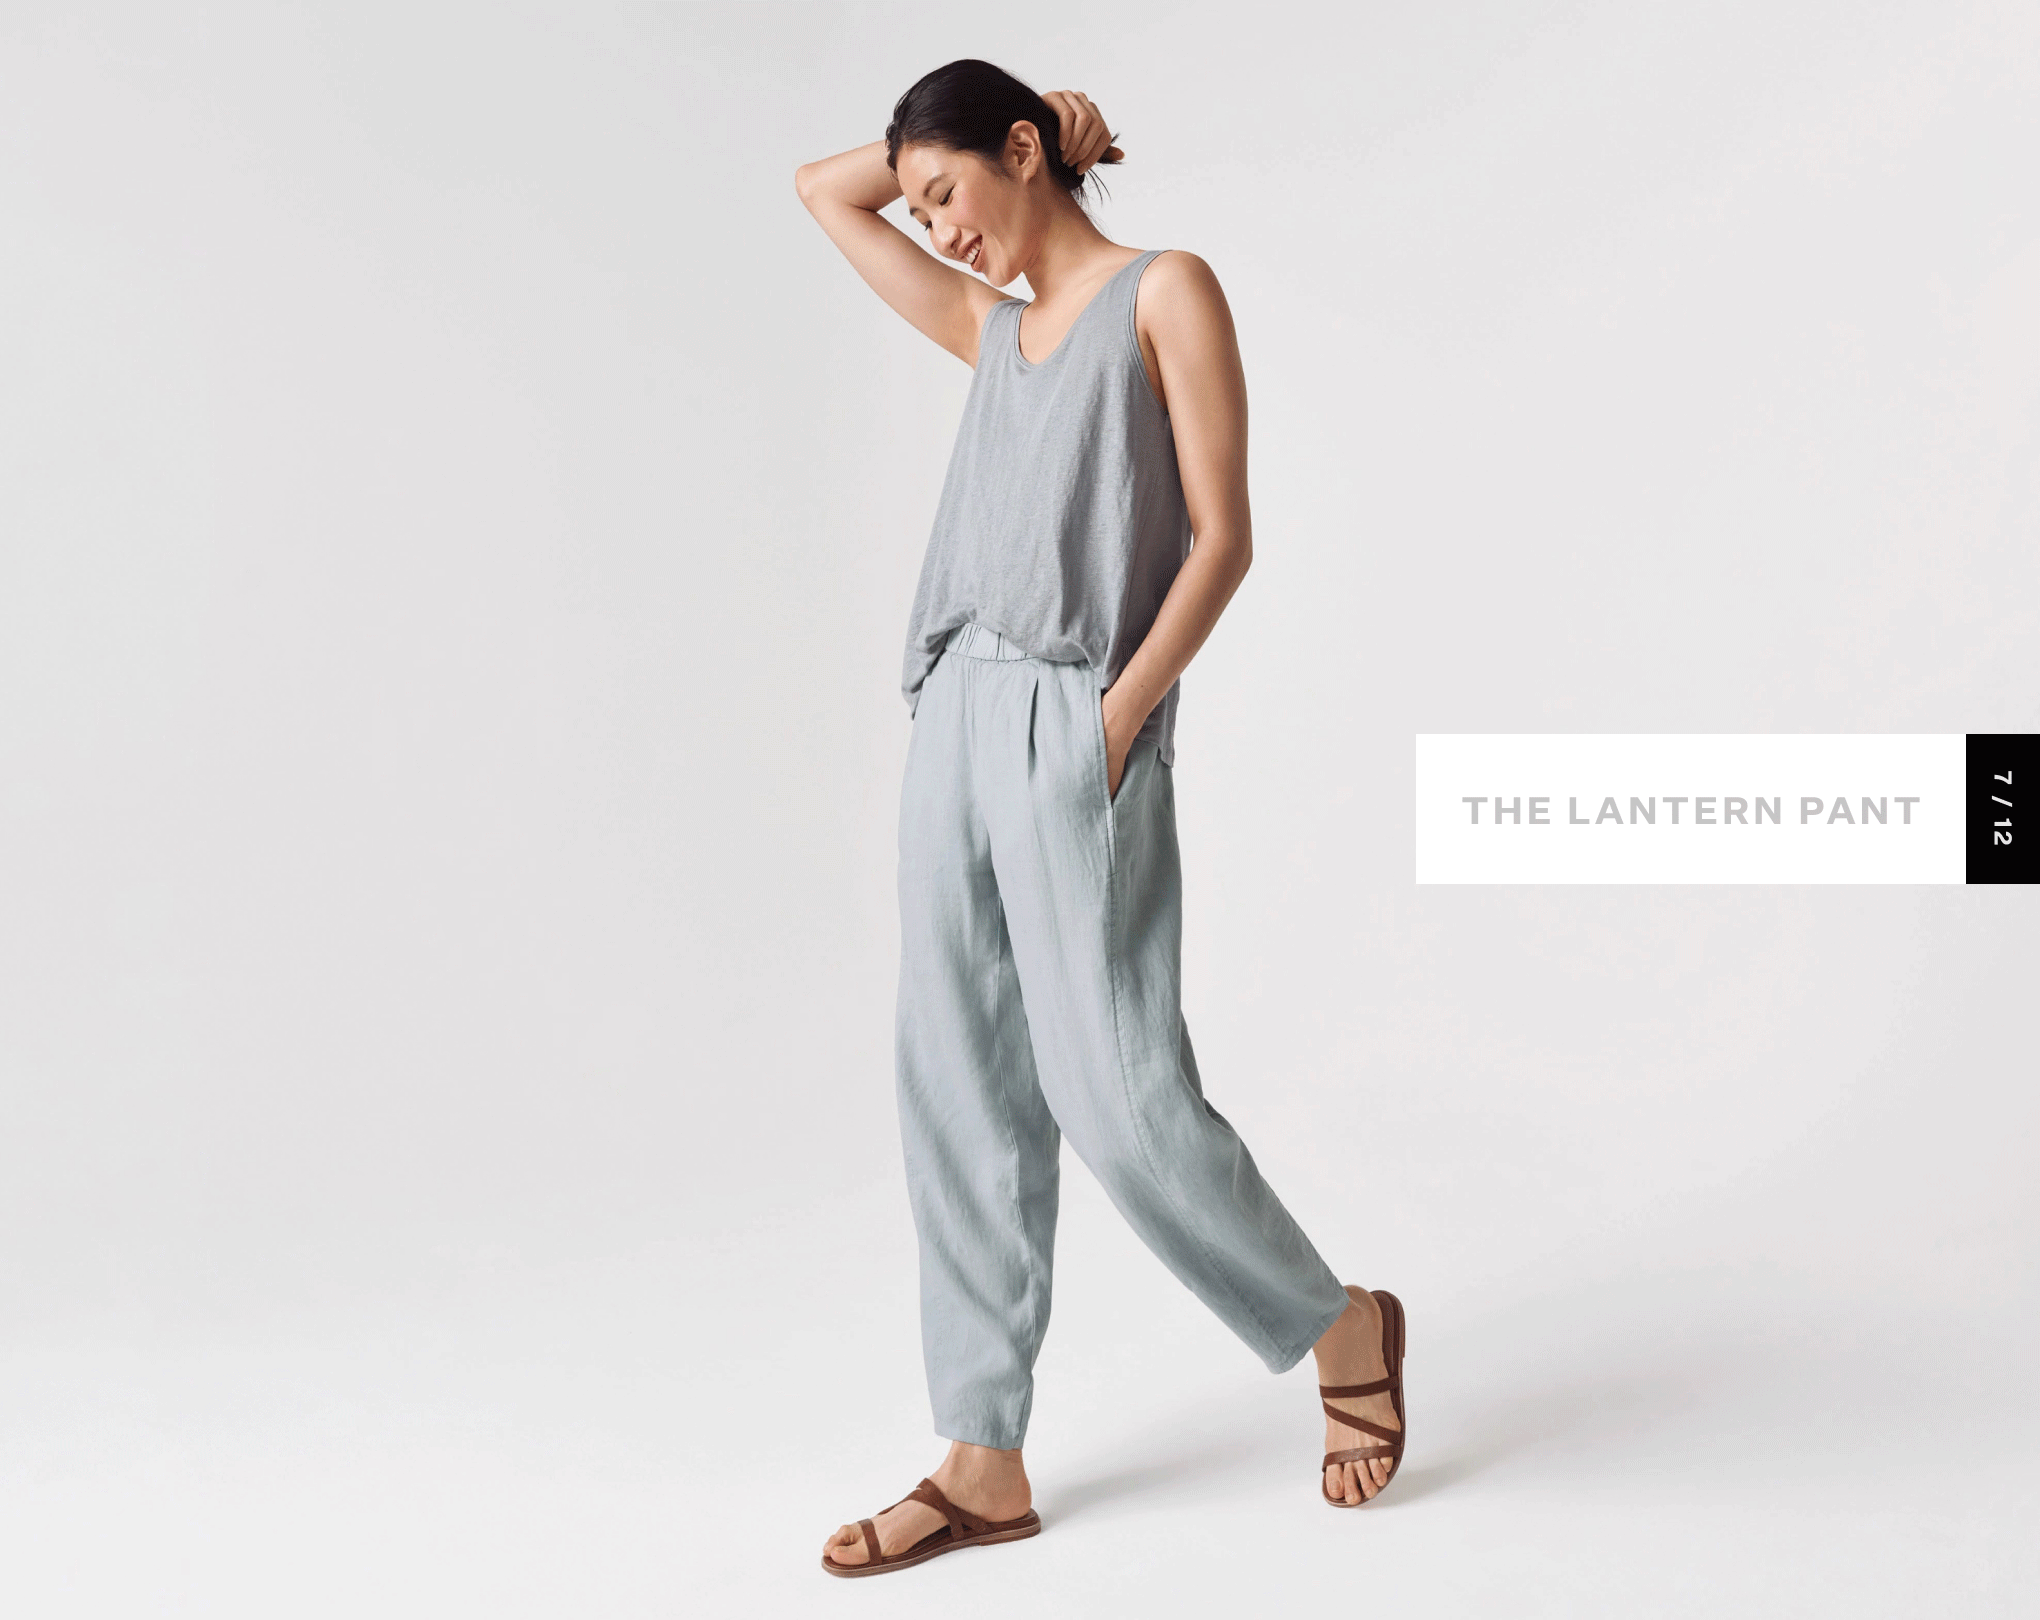 Organic Linen Lantern Pant in Geyser and Nile